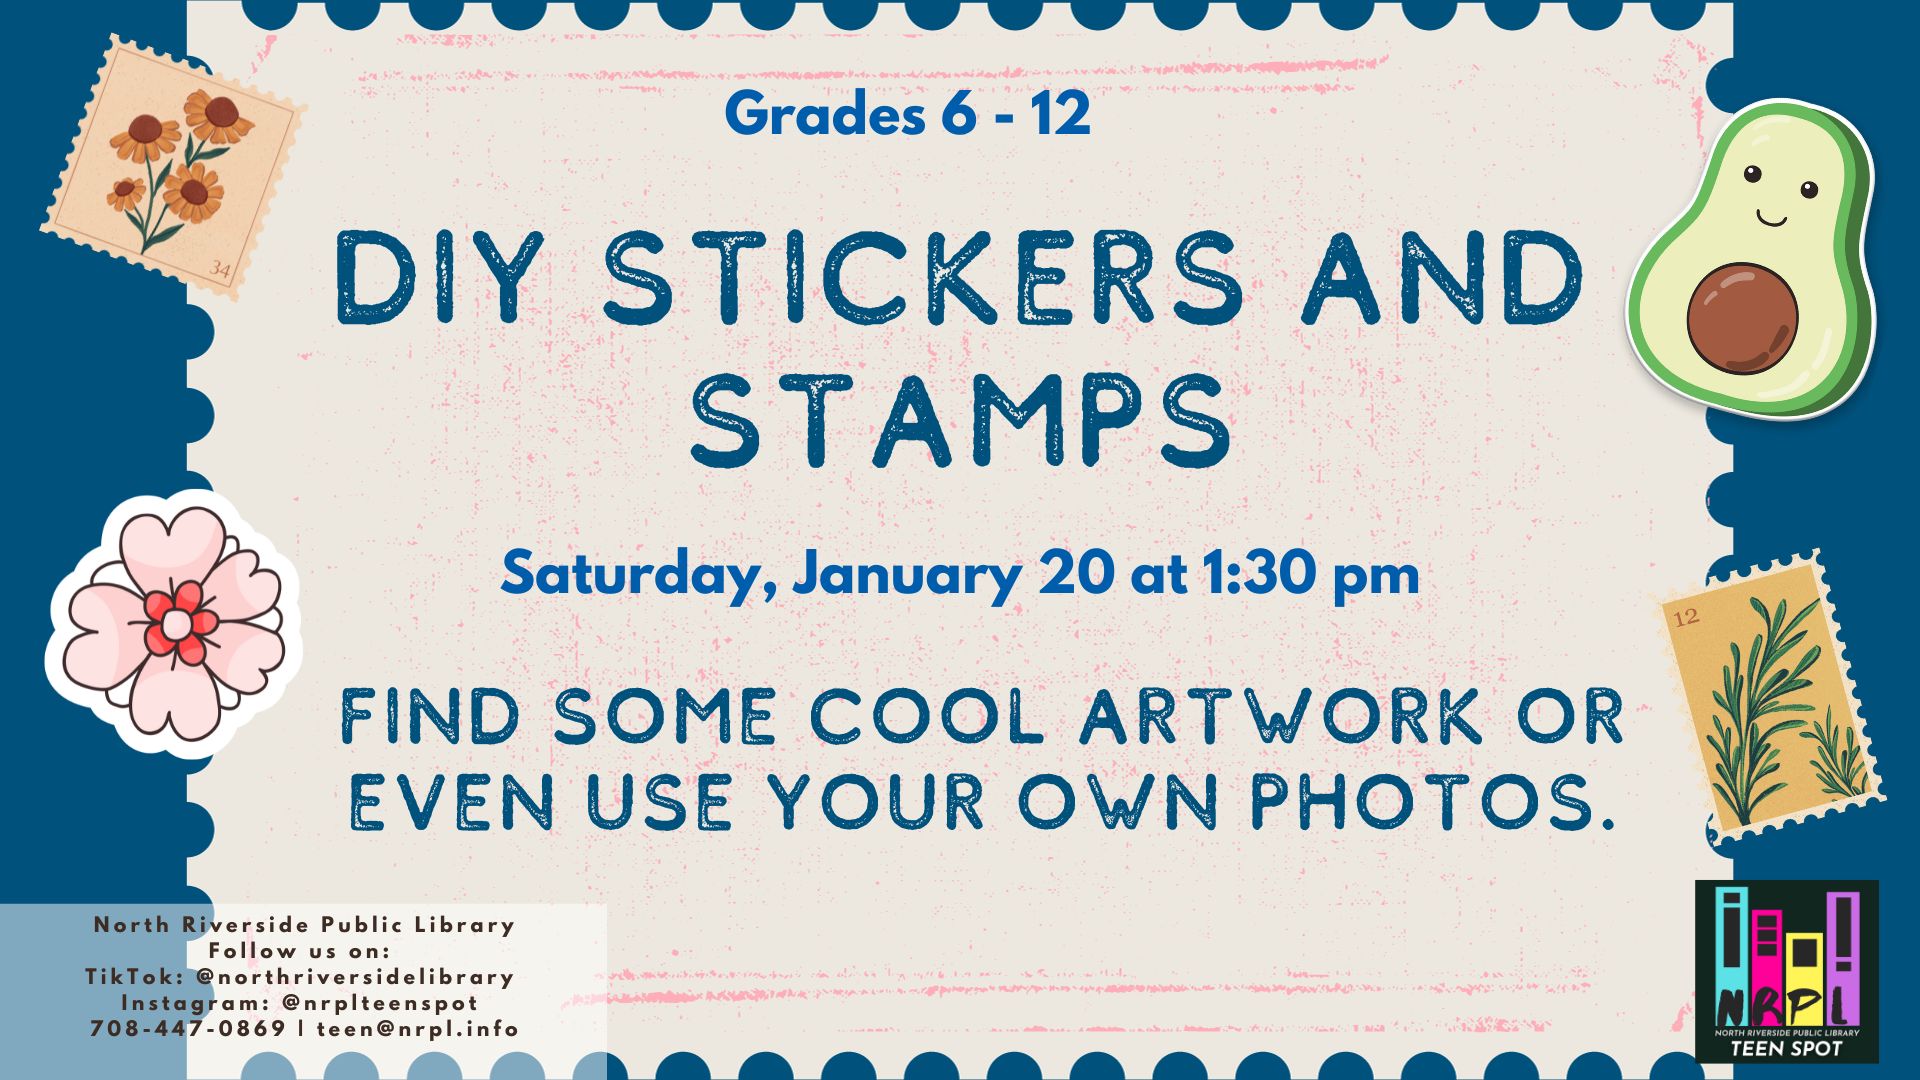 DIY Stickers and Stamps program flyer for teens